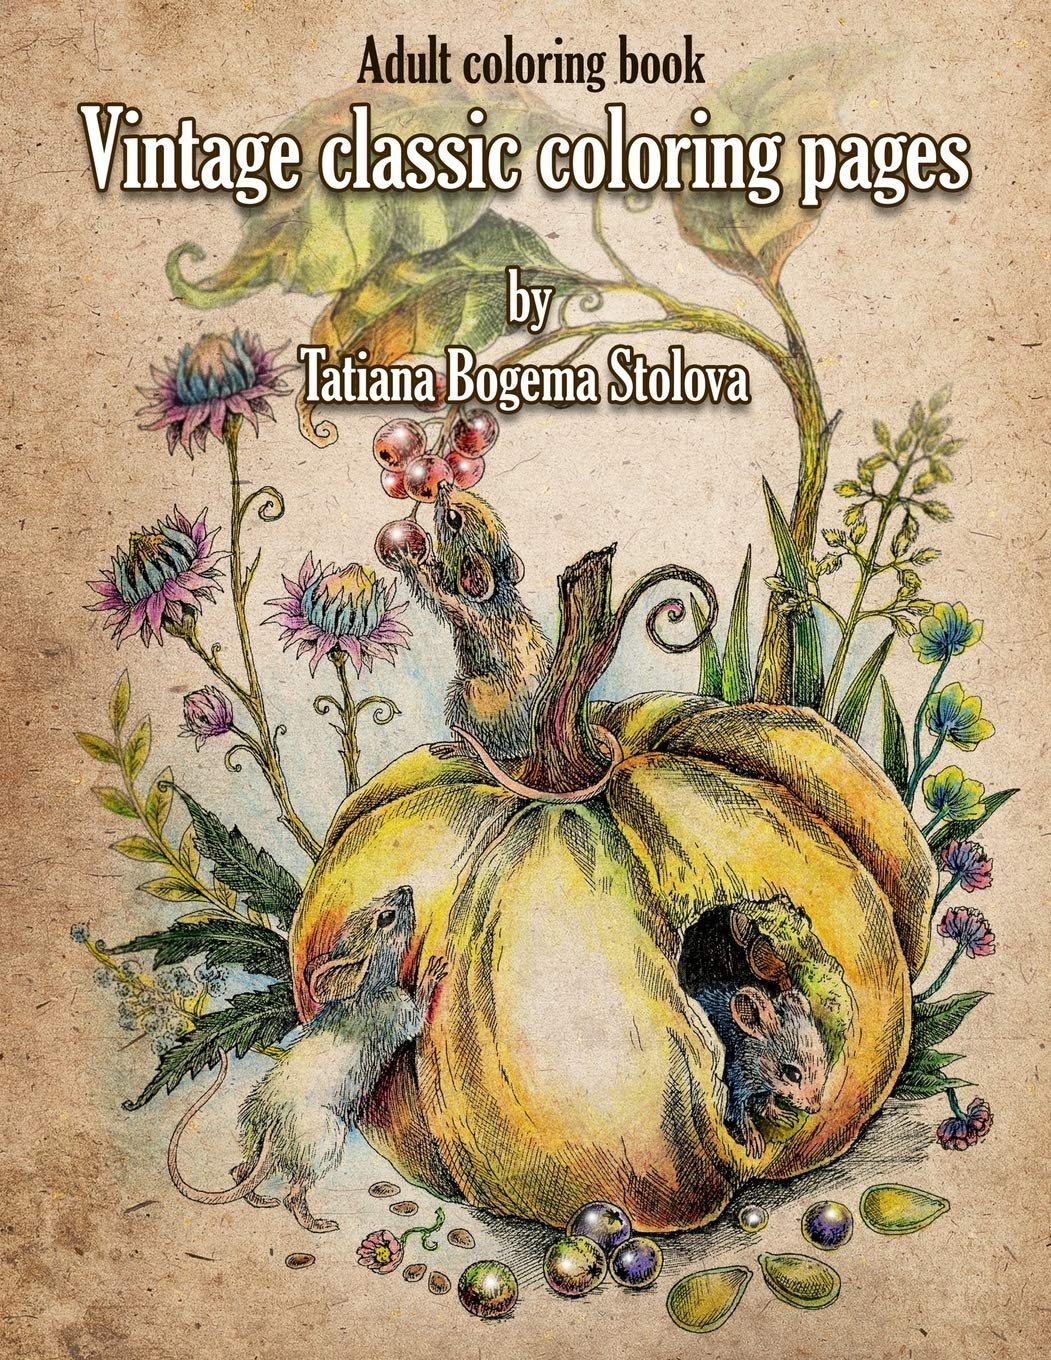 Vintage Classic Coloring Pages: Adult Coloring Book (Relaxing coloring pages, Stress Relieving Designs, People, Animals, Flowers, Fairies and More)